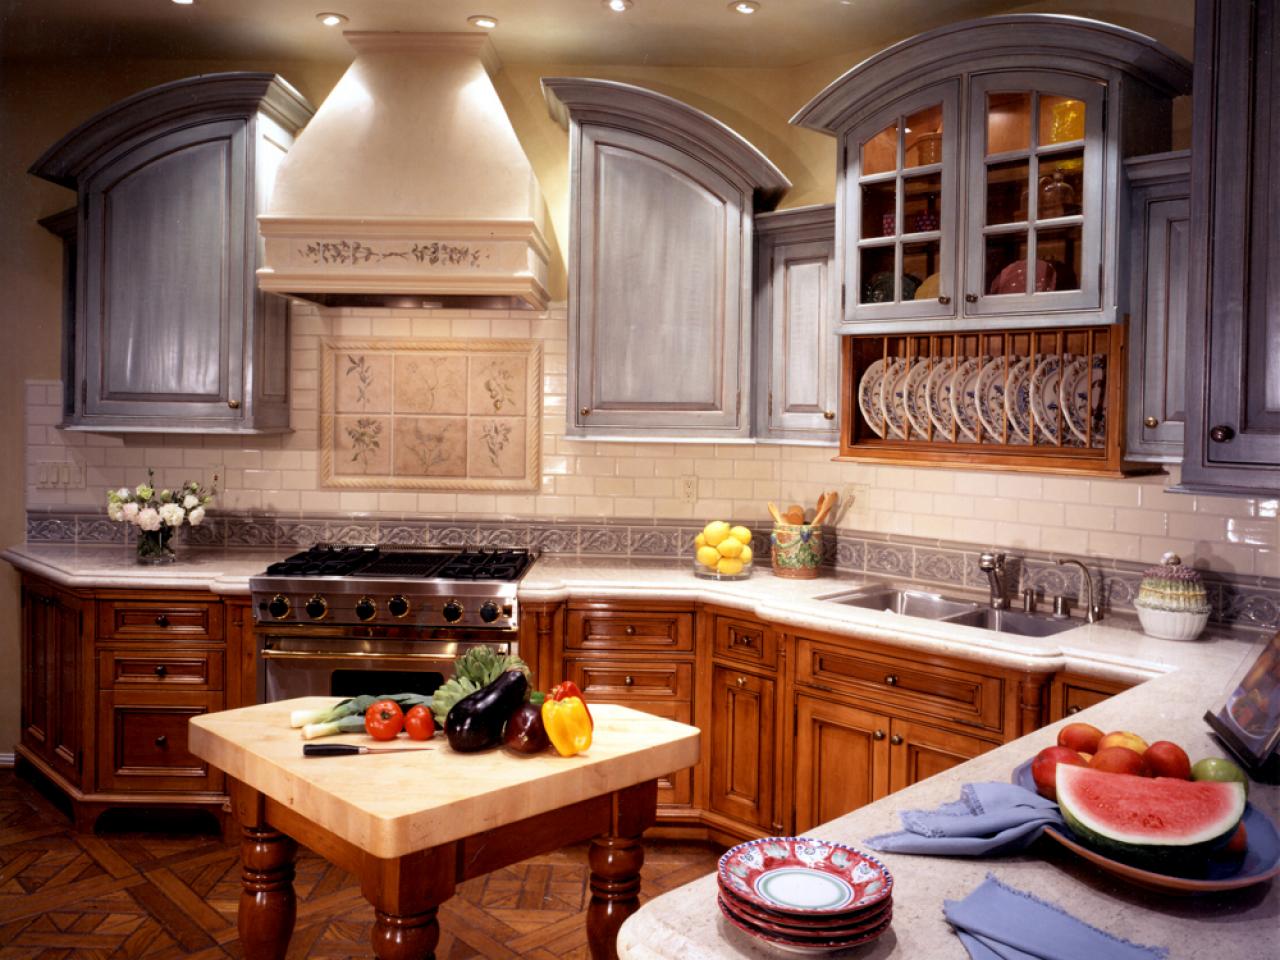 Kitchen Cabinet Options Pictures, Options, Tips & Ideas   HGTV